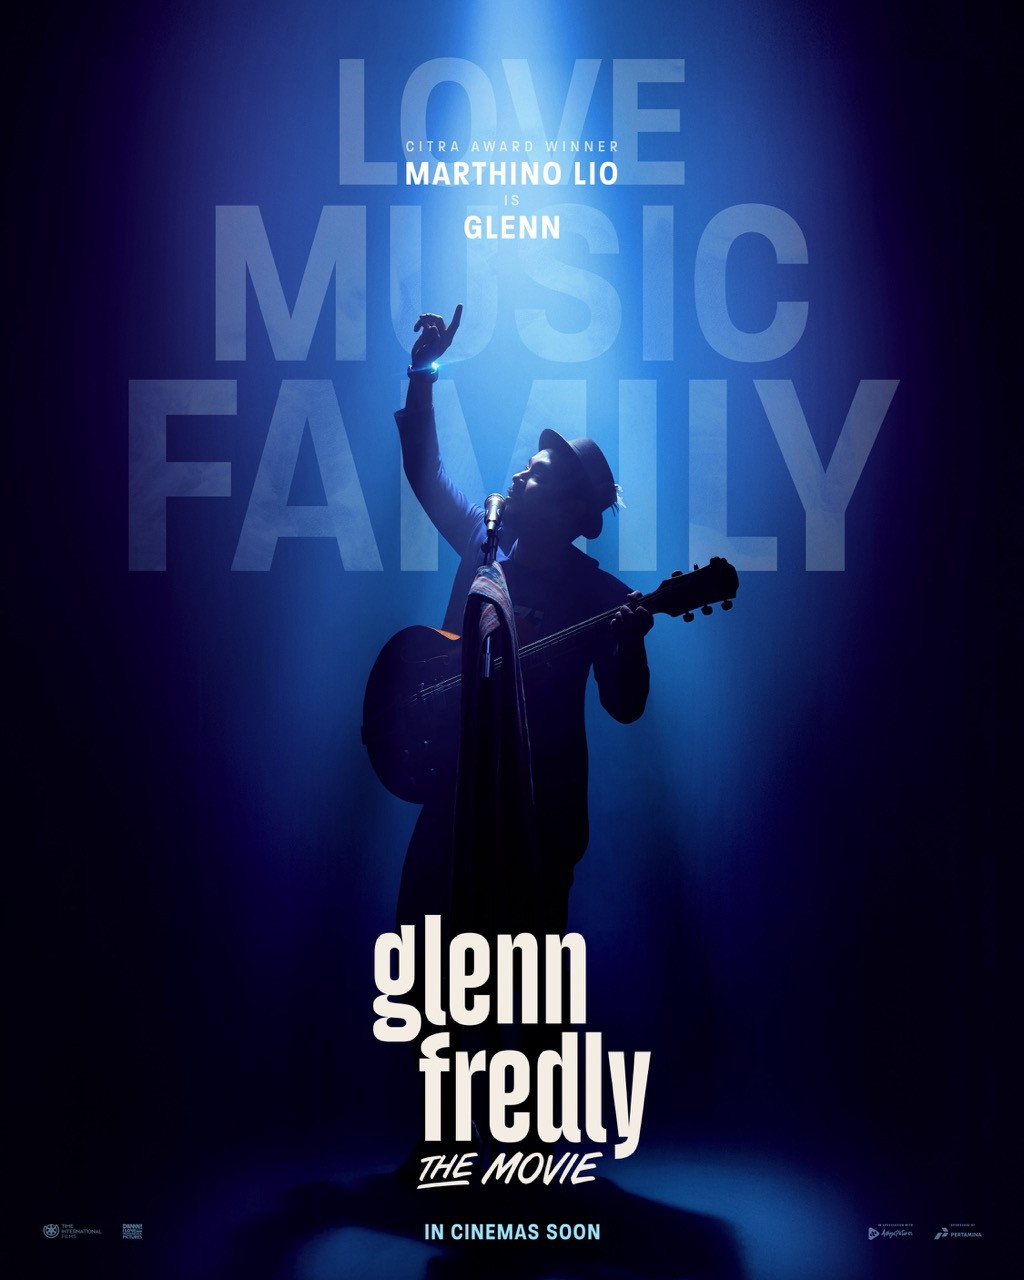 The fearless, and spiritual, journey leading up to 'Glenn Fredly The Movie'